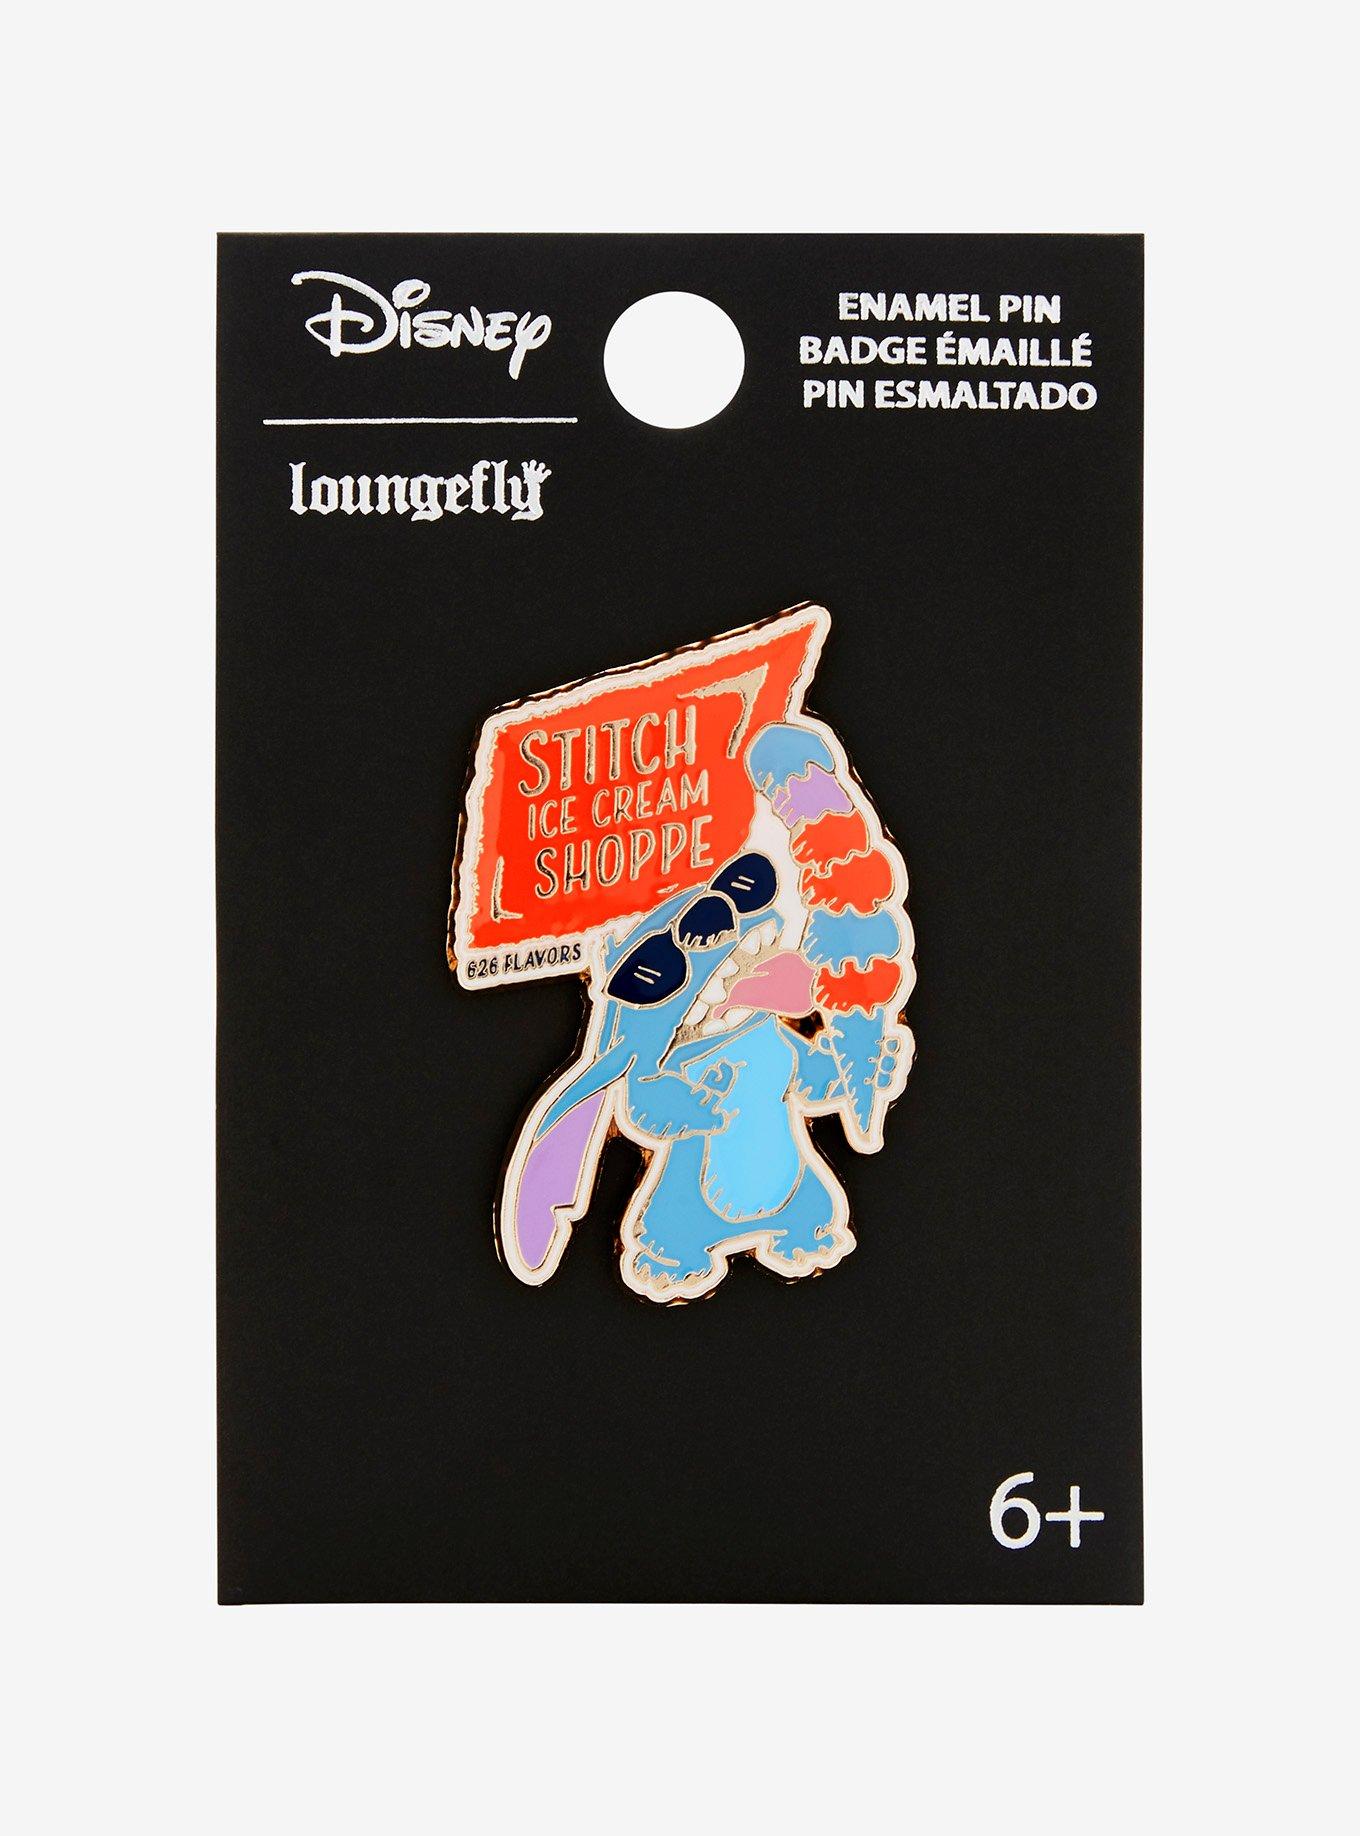 Loungefly Disney Lilo & Stitch Ice Cream Shoppe 626 Flavors Enamel Pin — BoxLunch Exclusive, , alternate